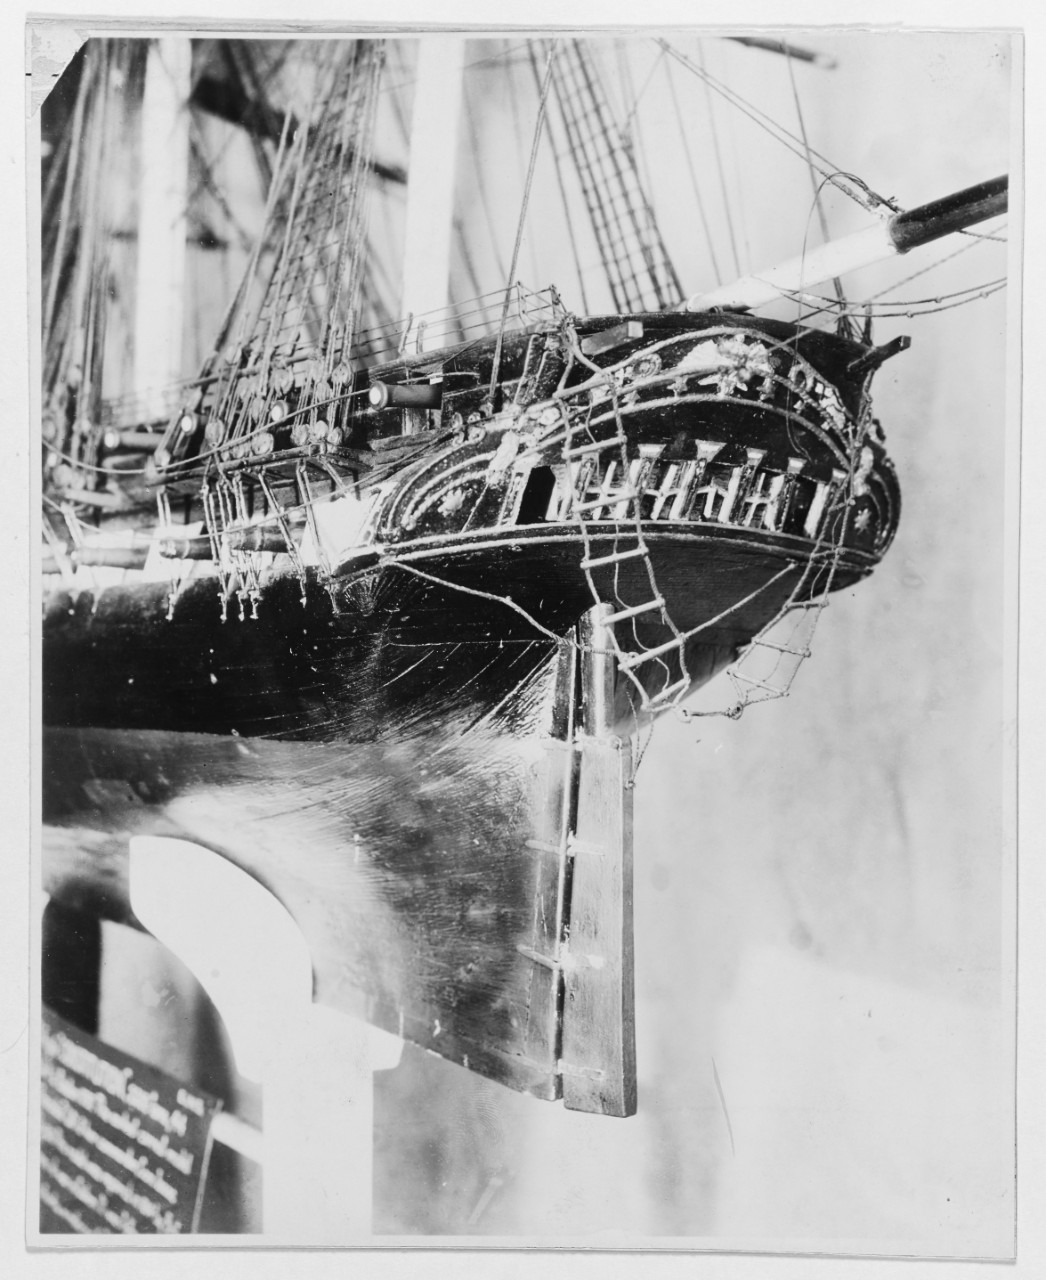 Photo #: NH 54009  Model of USS Constitution (1798-____)